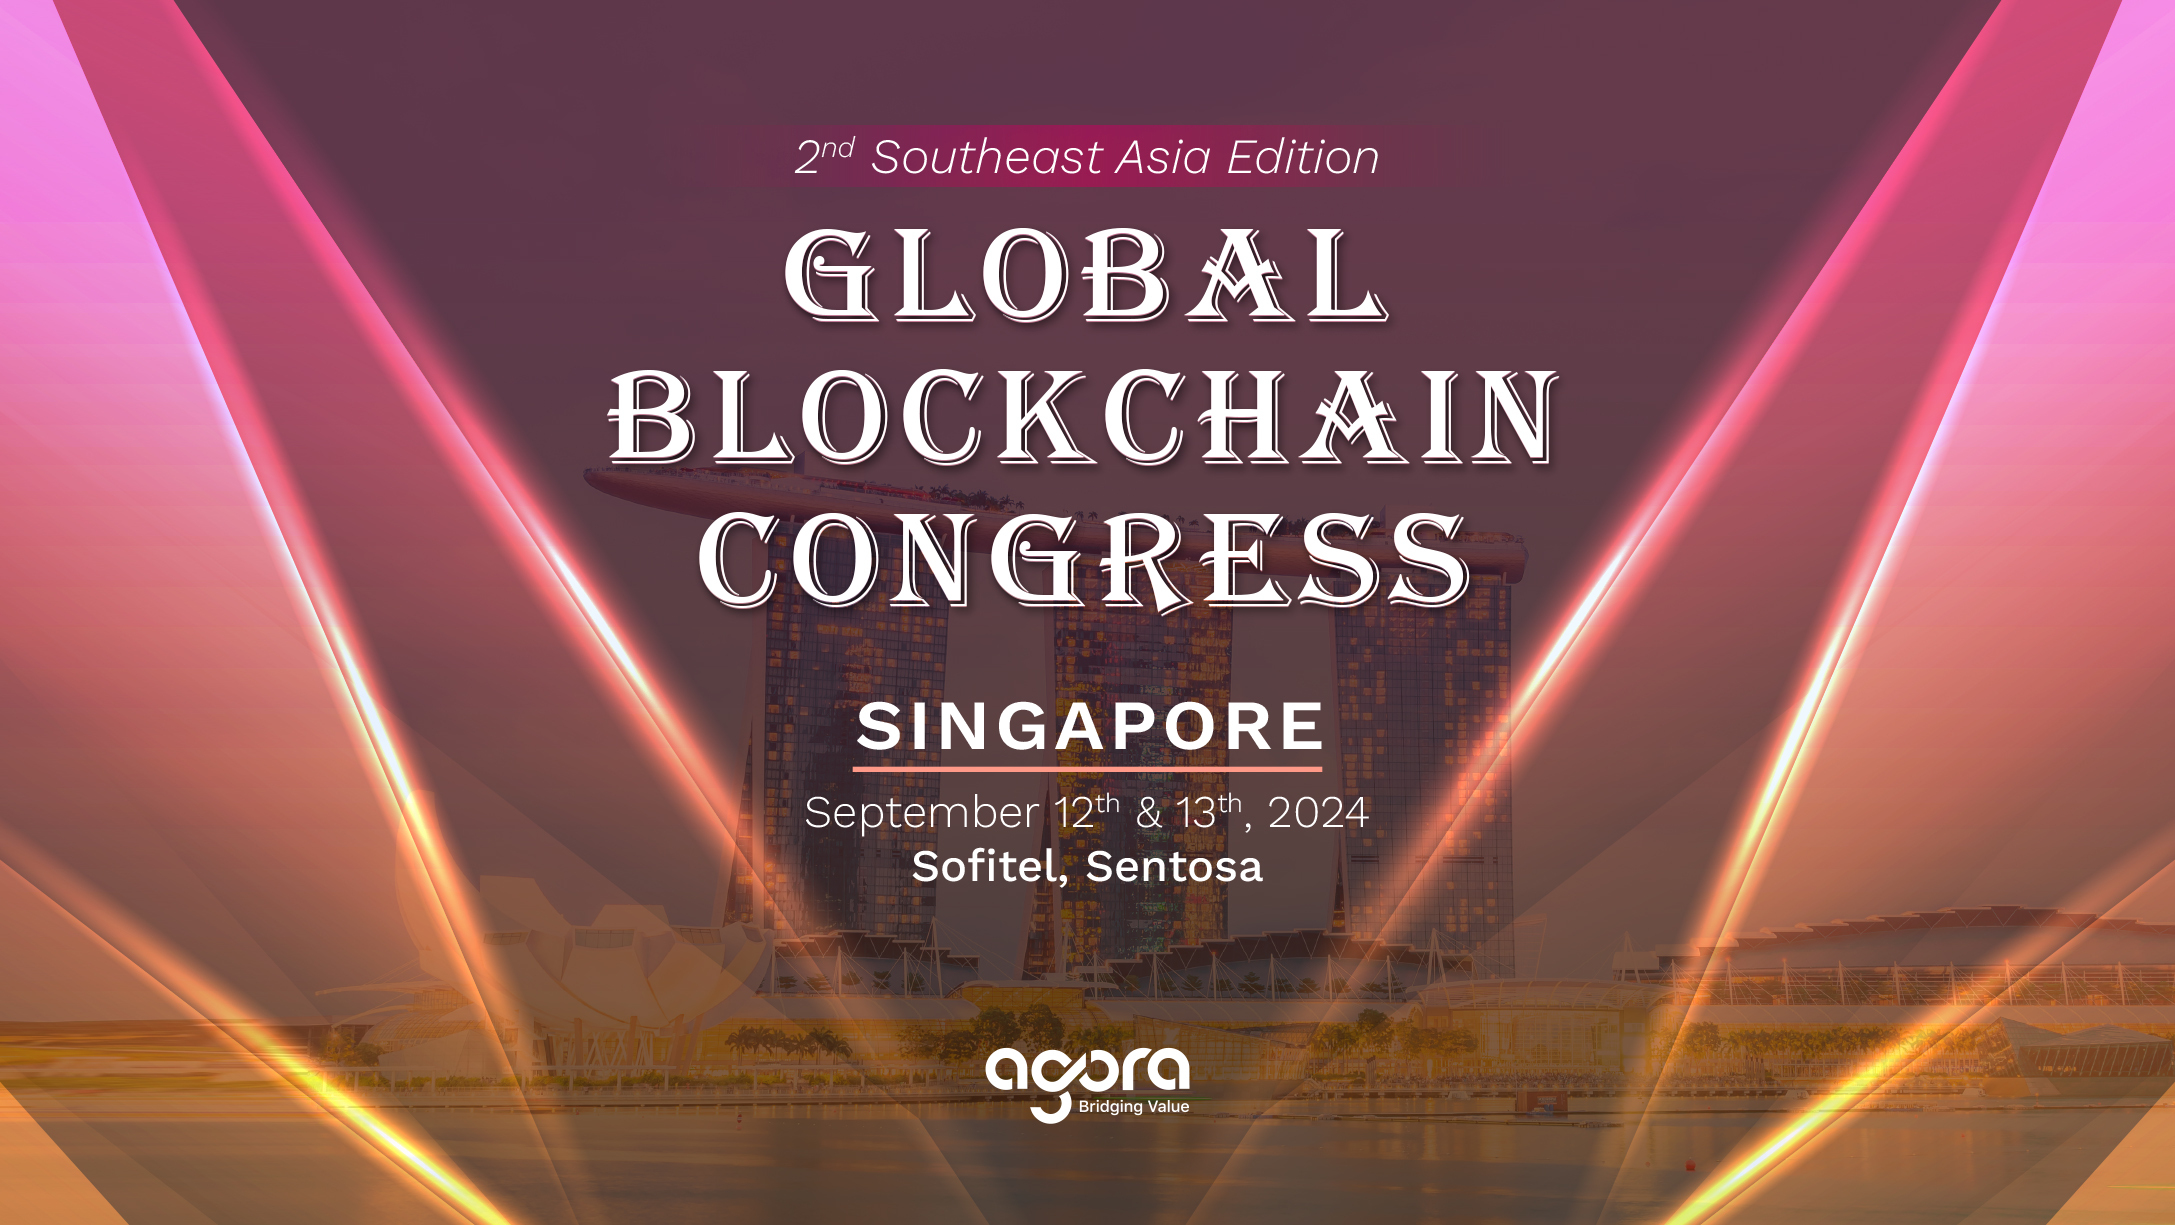 Global Blockchain Congress is Going from Dubai to Singapore!